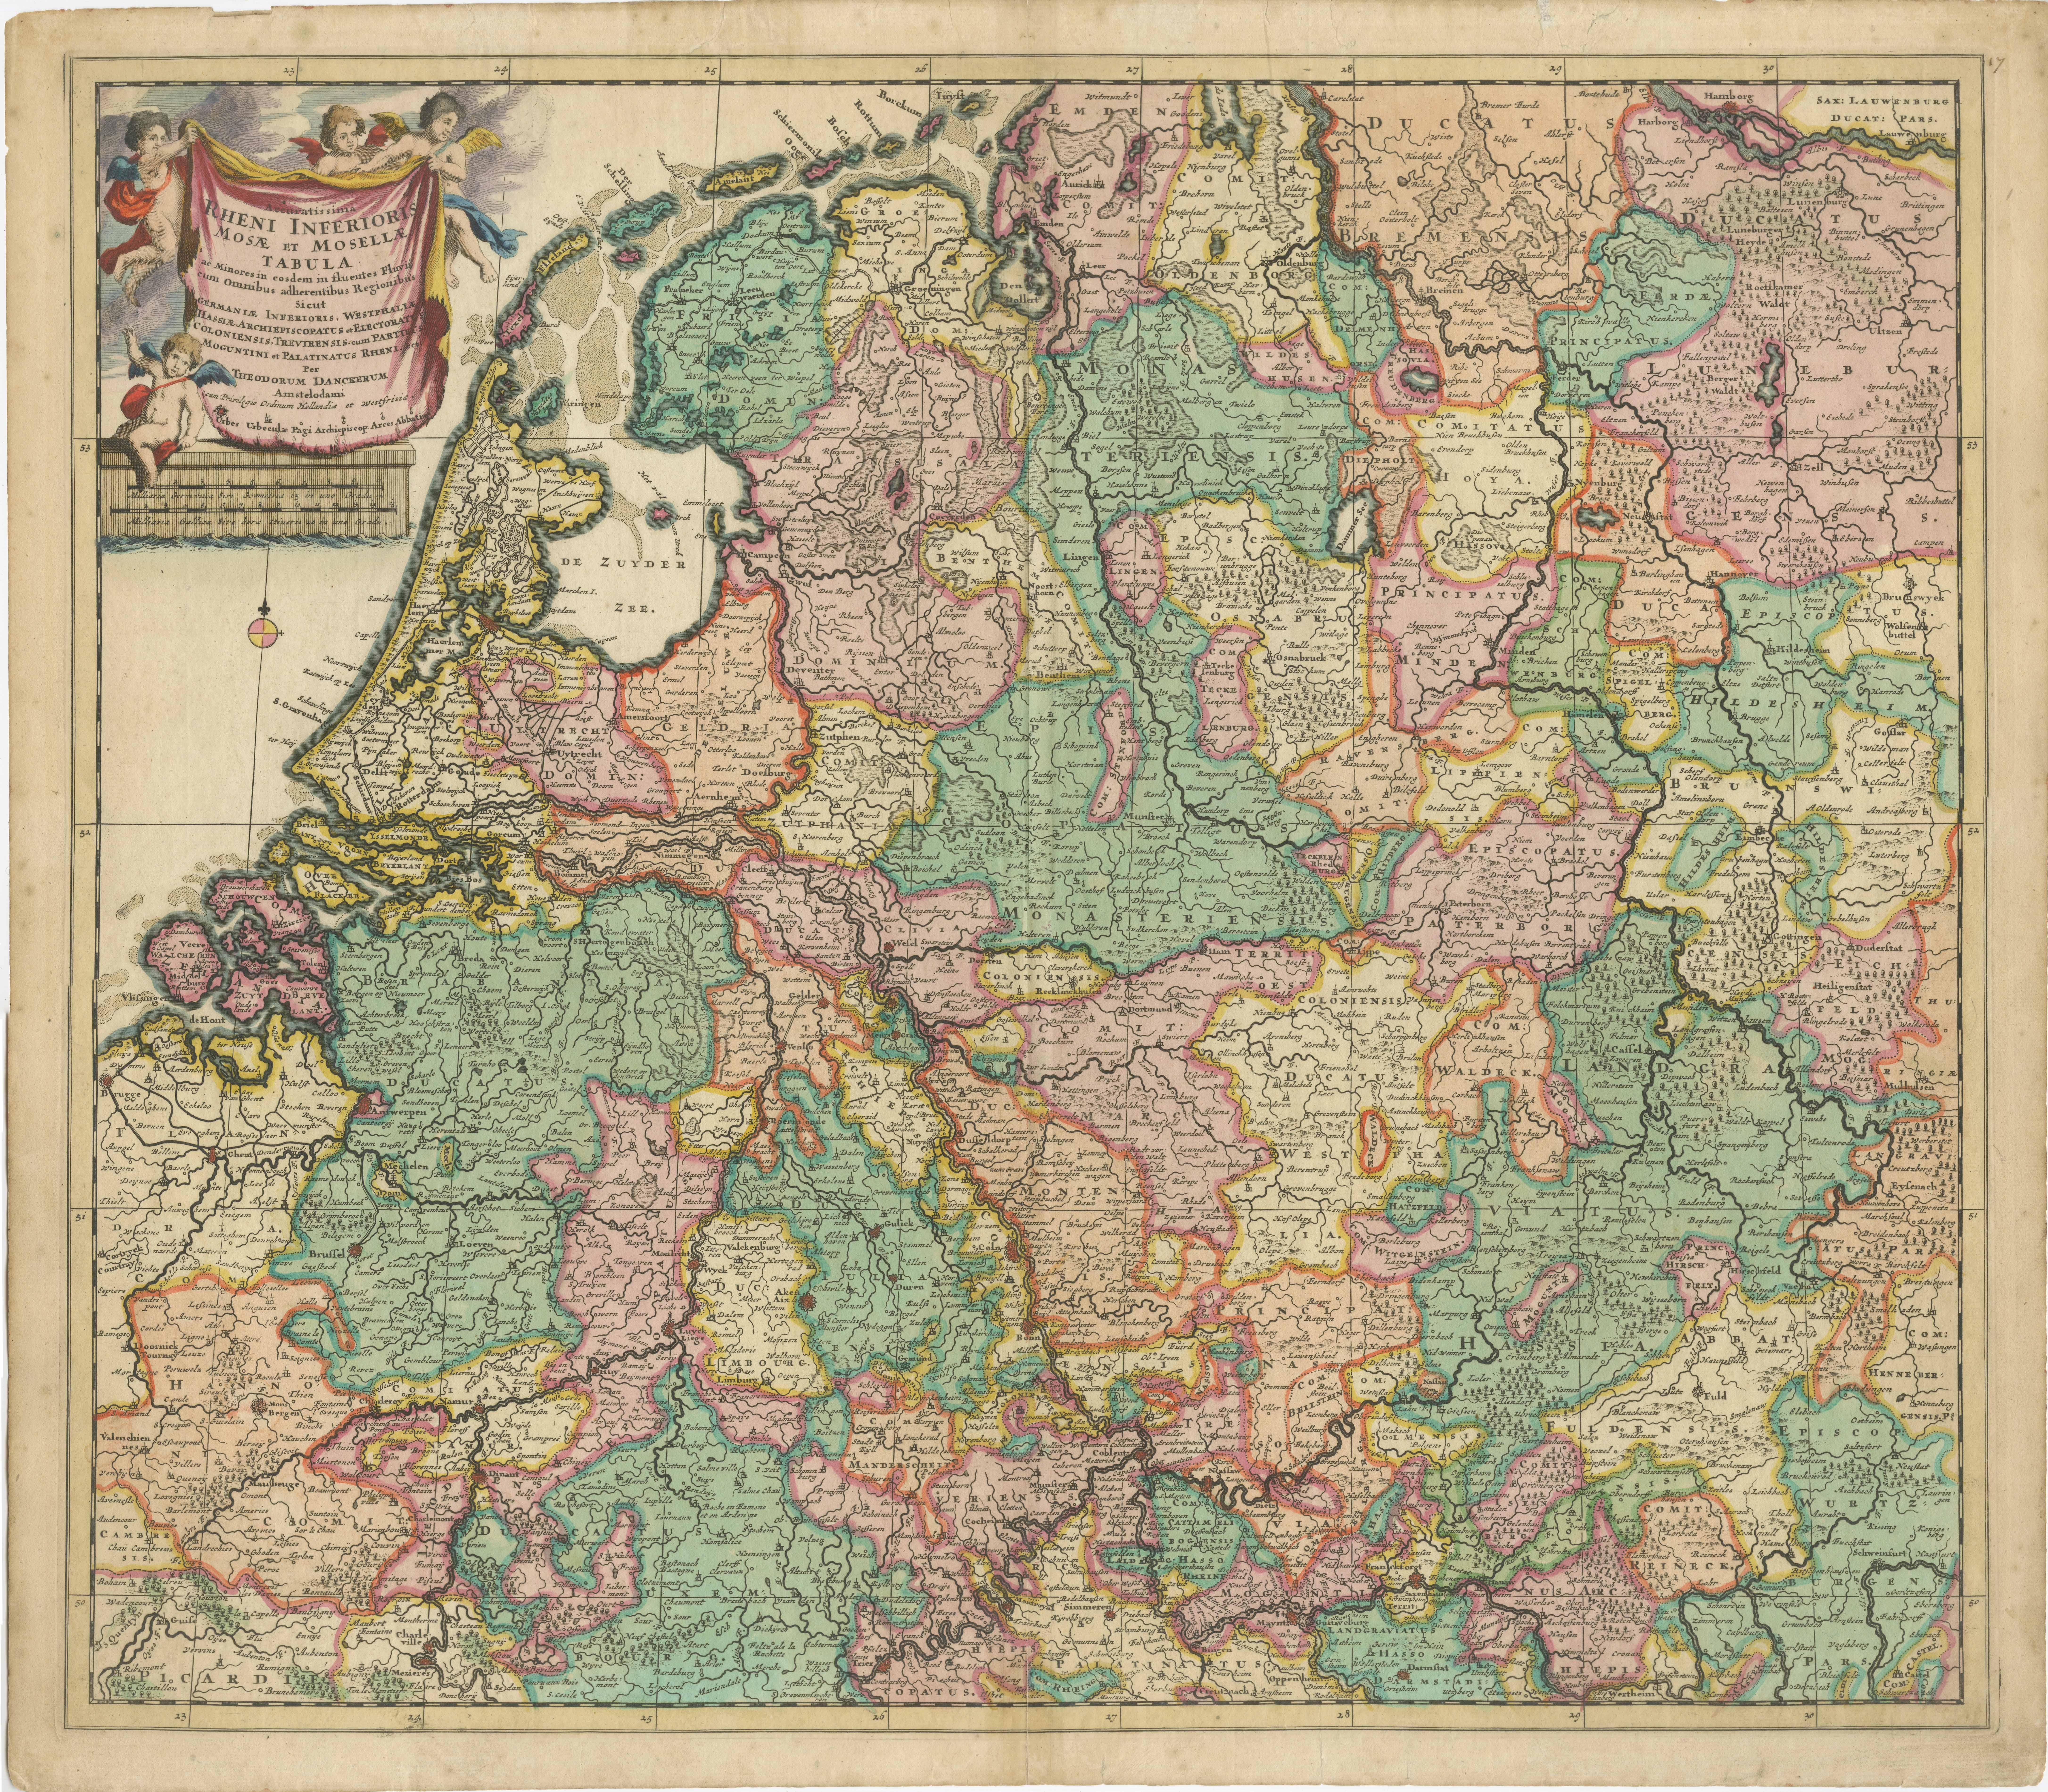 Beautiful original hand-colored antique map of a large part of Western Europe. 

Title: Accuratissima Rheni Inferioris, Mosae et Mosellae Tabula. 
Maker: T. Danckerts. Amsterdam, c. 1700. 

This decorative engraving shows especially the basins